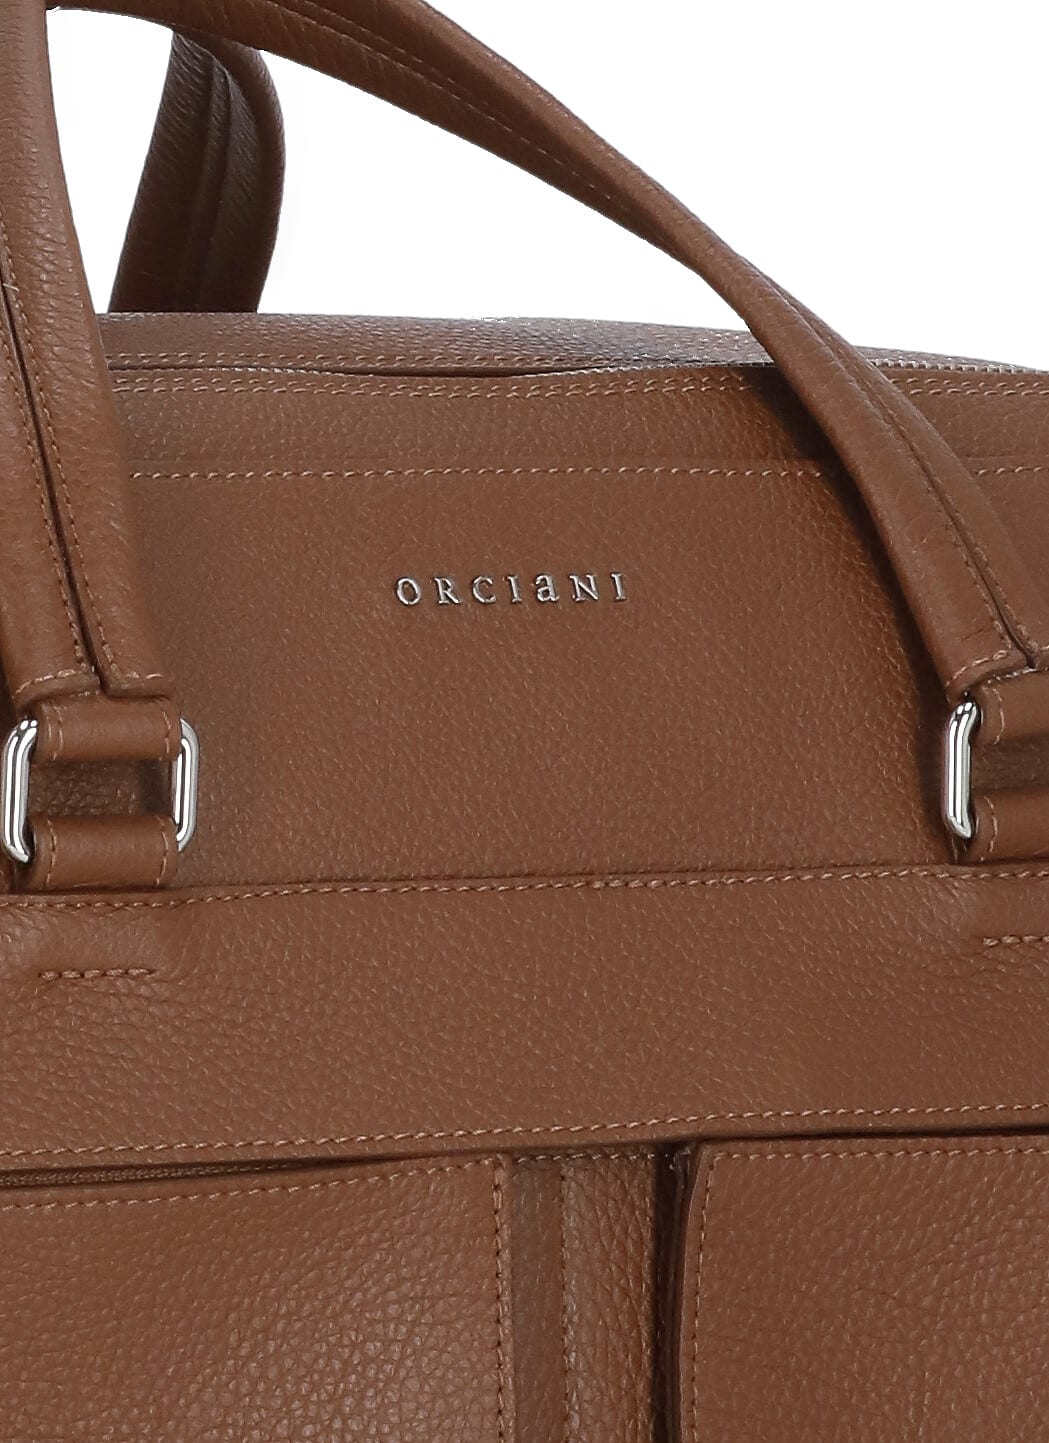 Shop Orciani Micron Pebbled Leather Travel Bag